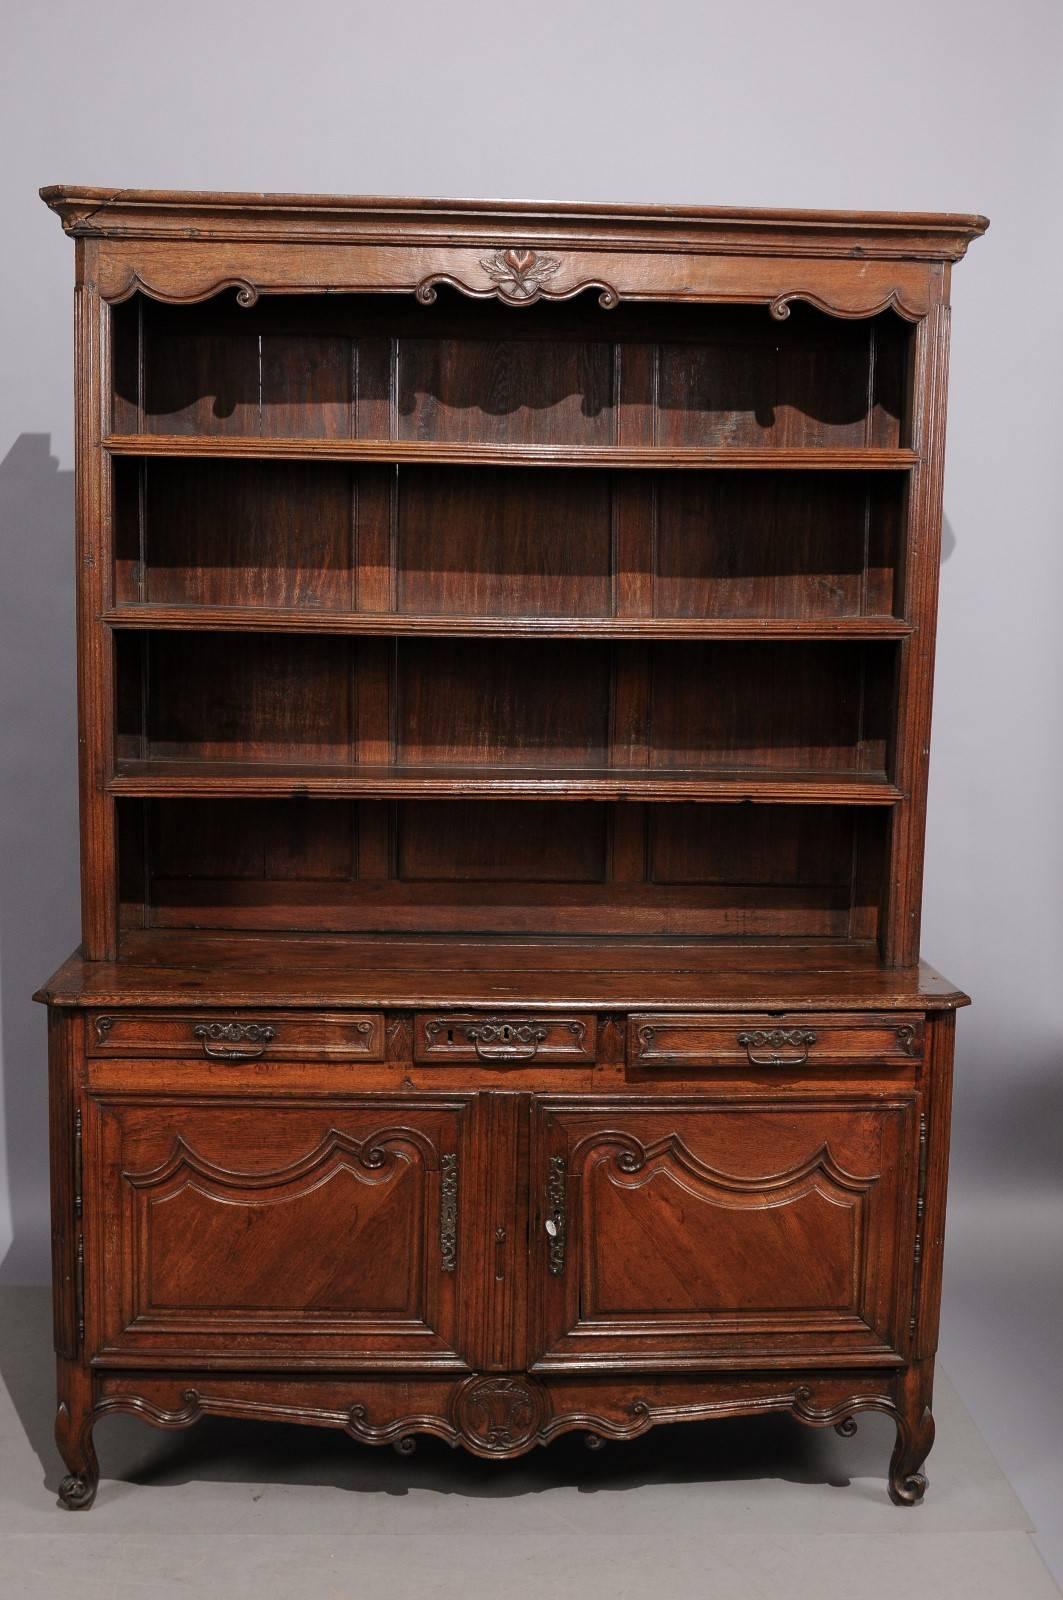 A 18th century French Transitional Louis XV & Louis XVI vaisellier in oak featuring plate shelving above buffet cabinet with 3 drawers, 2 carved paneled doors and shaped apron ending in cabriole legs. 

 